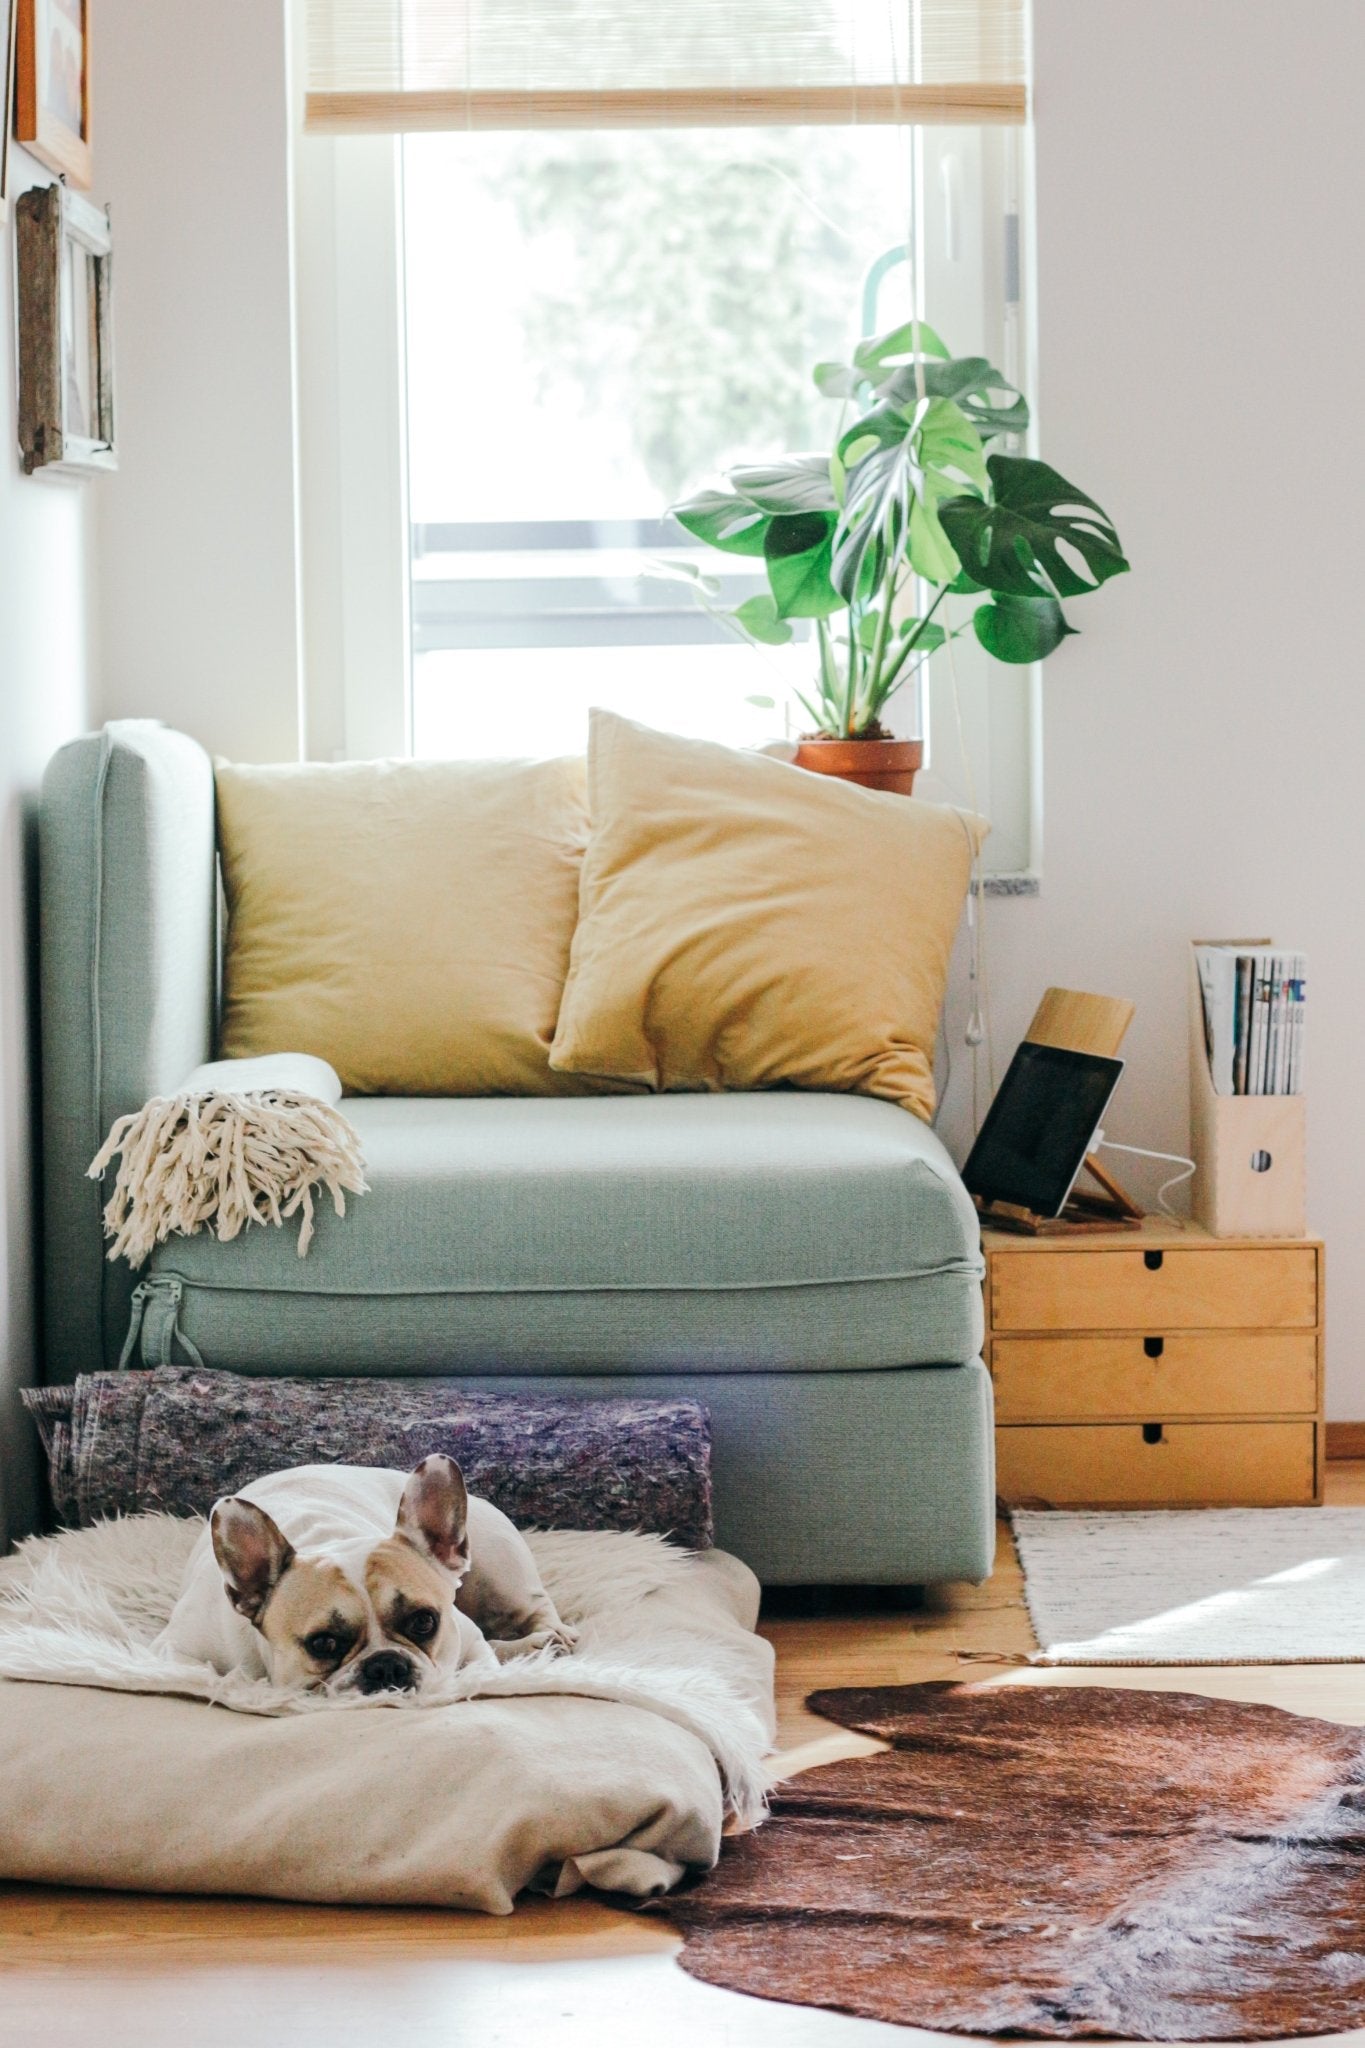 5 Mindful Transition Rituals to Signify Your Shift From Work to Home Life - Looshi